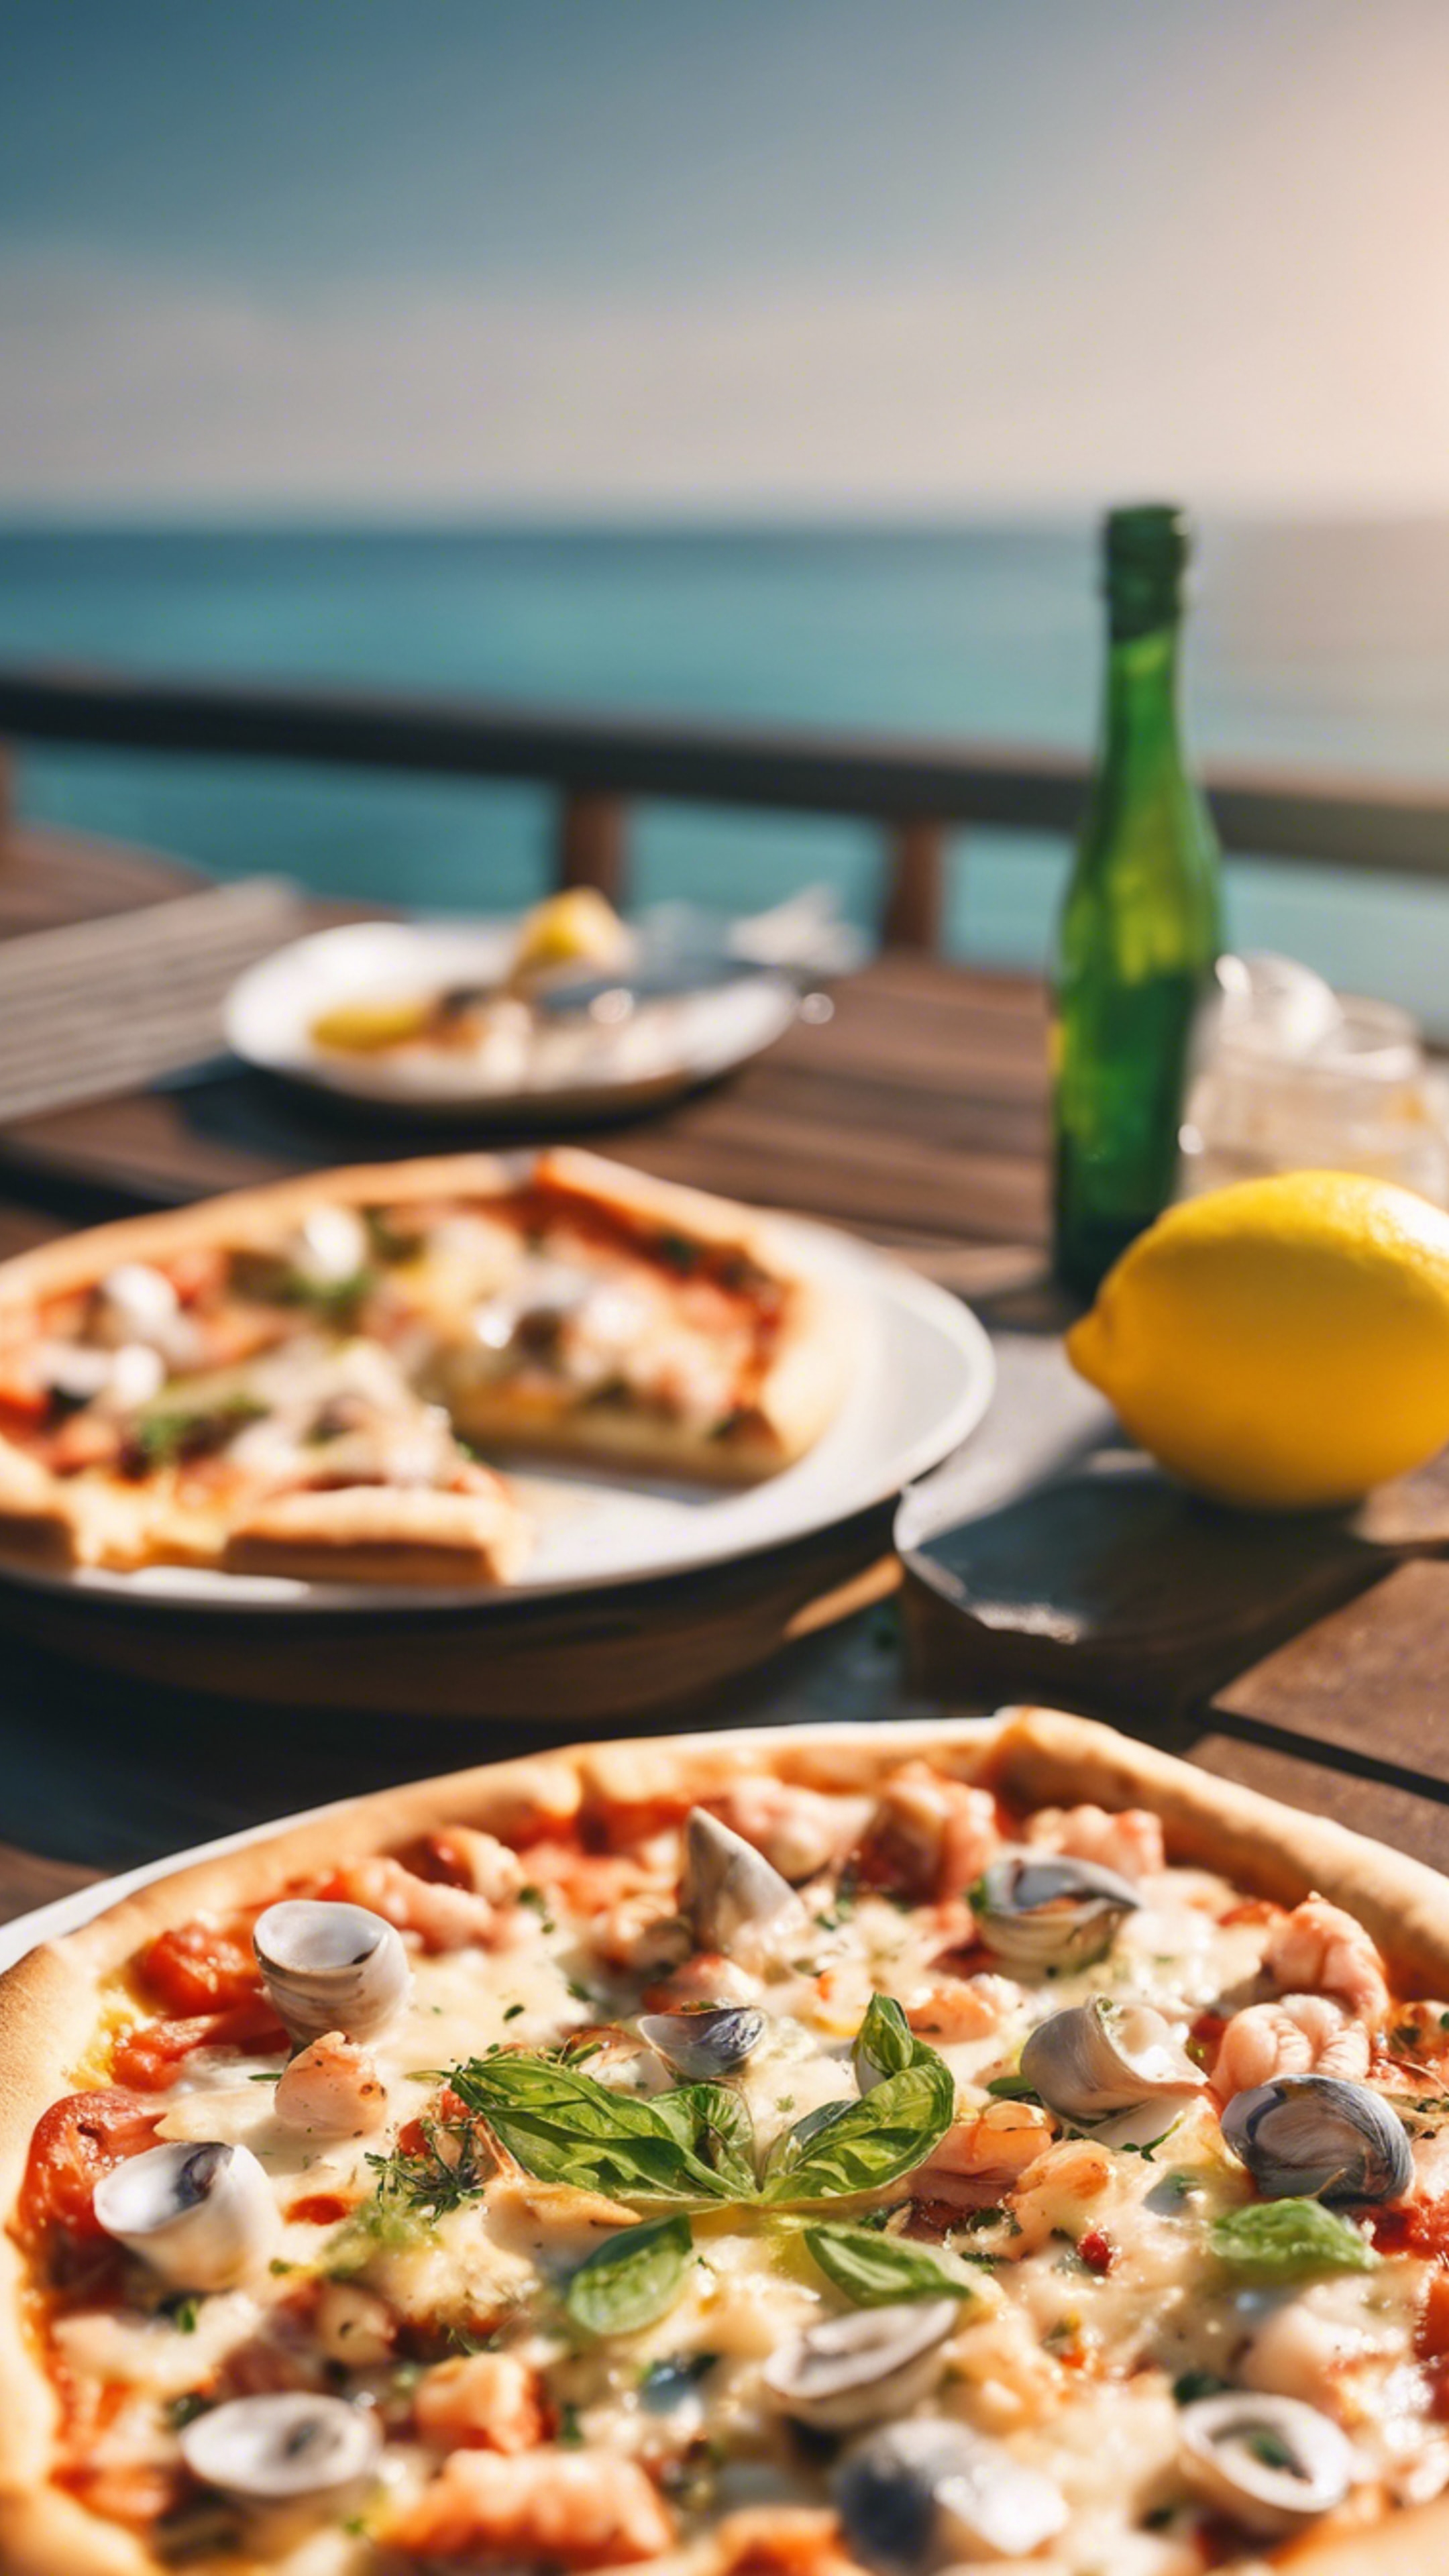 A zesty lemon and seafood pizza on a sunny seaside cafe table. Tapet[3a16046c2c4041a9a353]